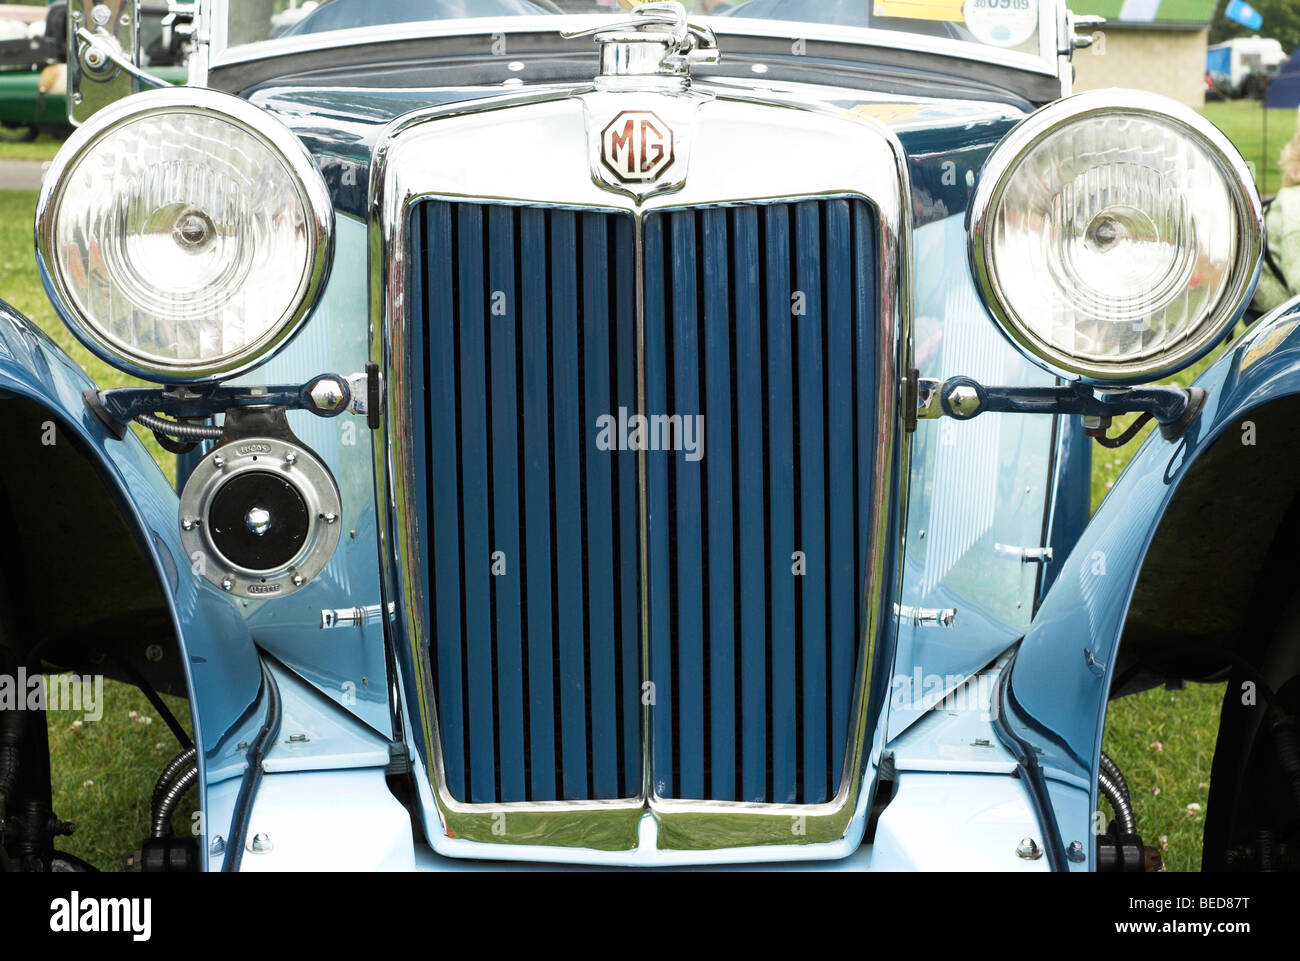 Frontage including badge, headlights and grill of a 1935 MG PB 2 str Classic Sports Car. Stock Photo